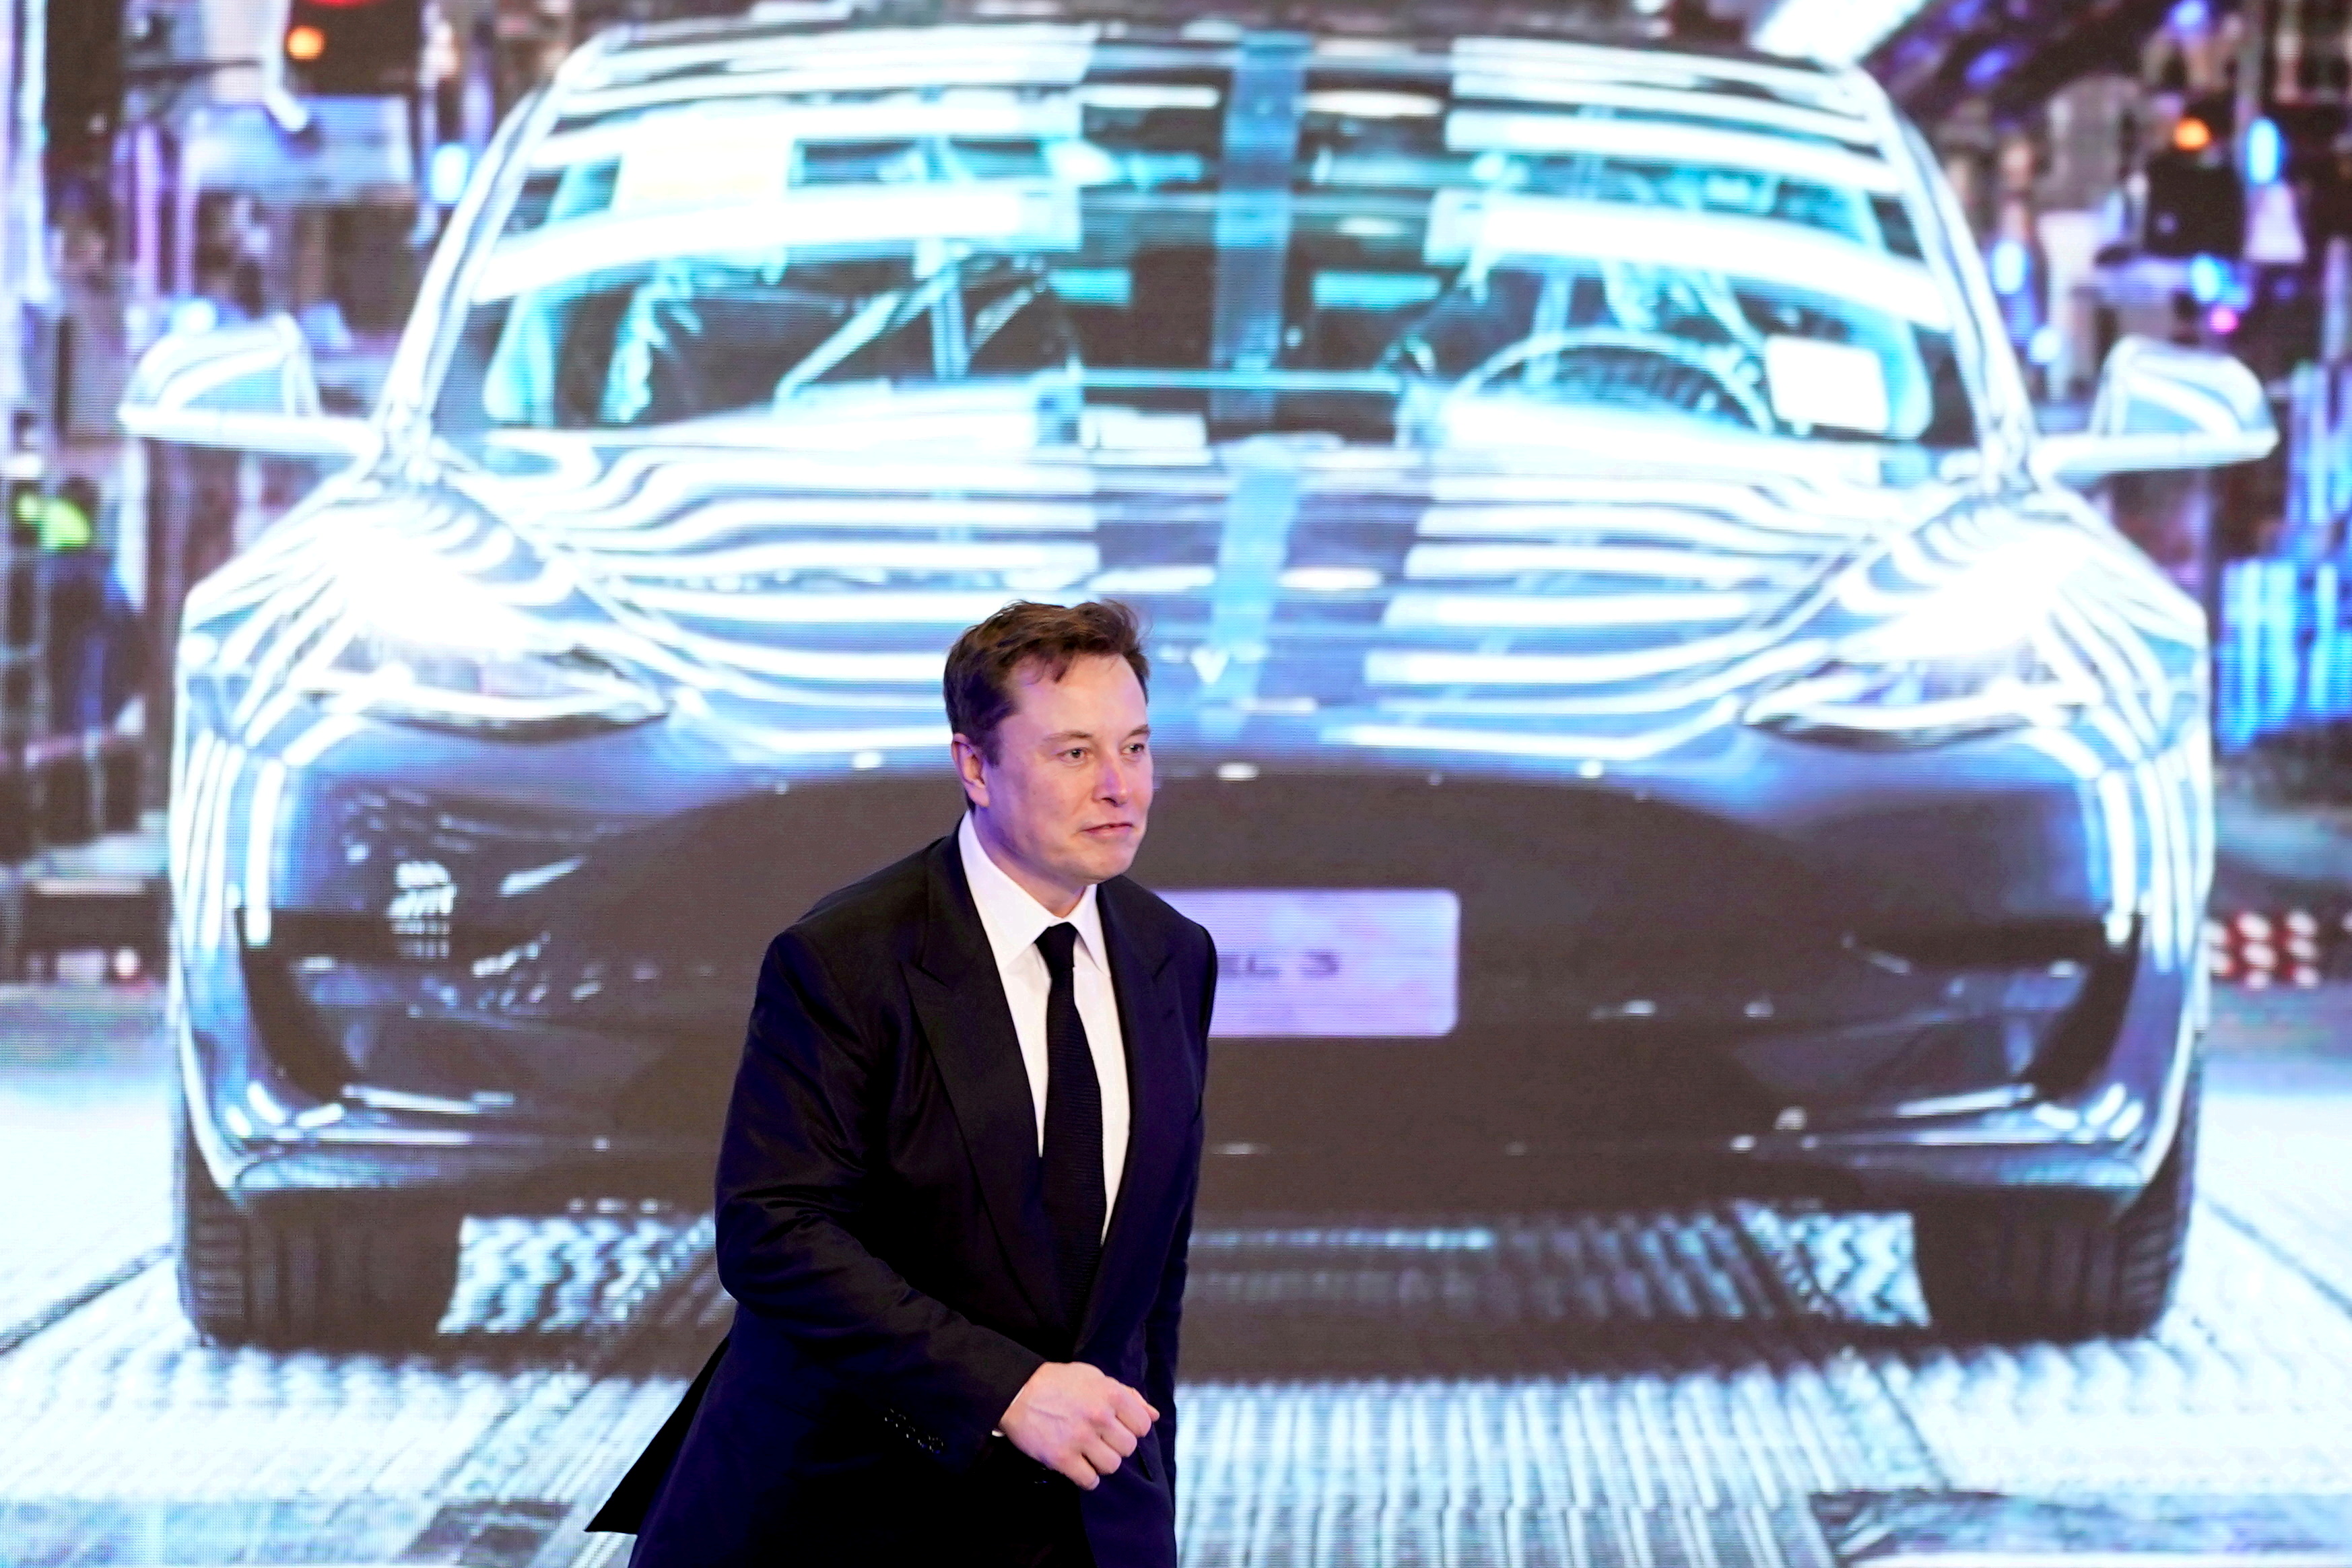 Tesla Inc CEO Elon Musk walks next to a screen showing an image of Tesla Model 3 car during an opening ceremony for Tesla China-made Model Y program in Shanghai, China January 7, 2020. REUTERS/Aly Song/File Photo